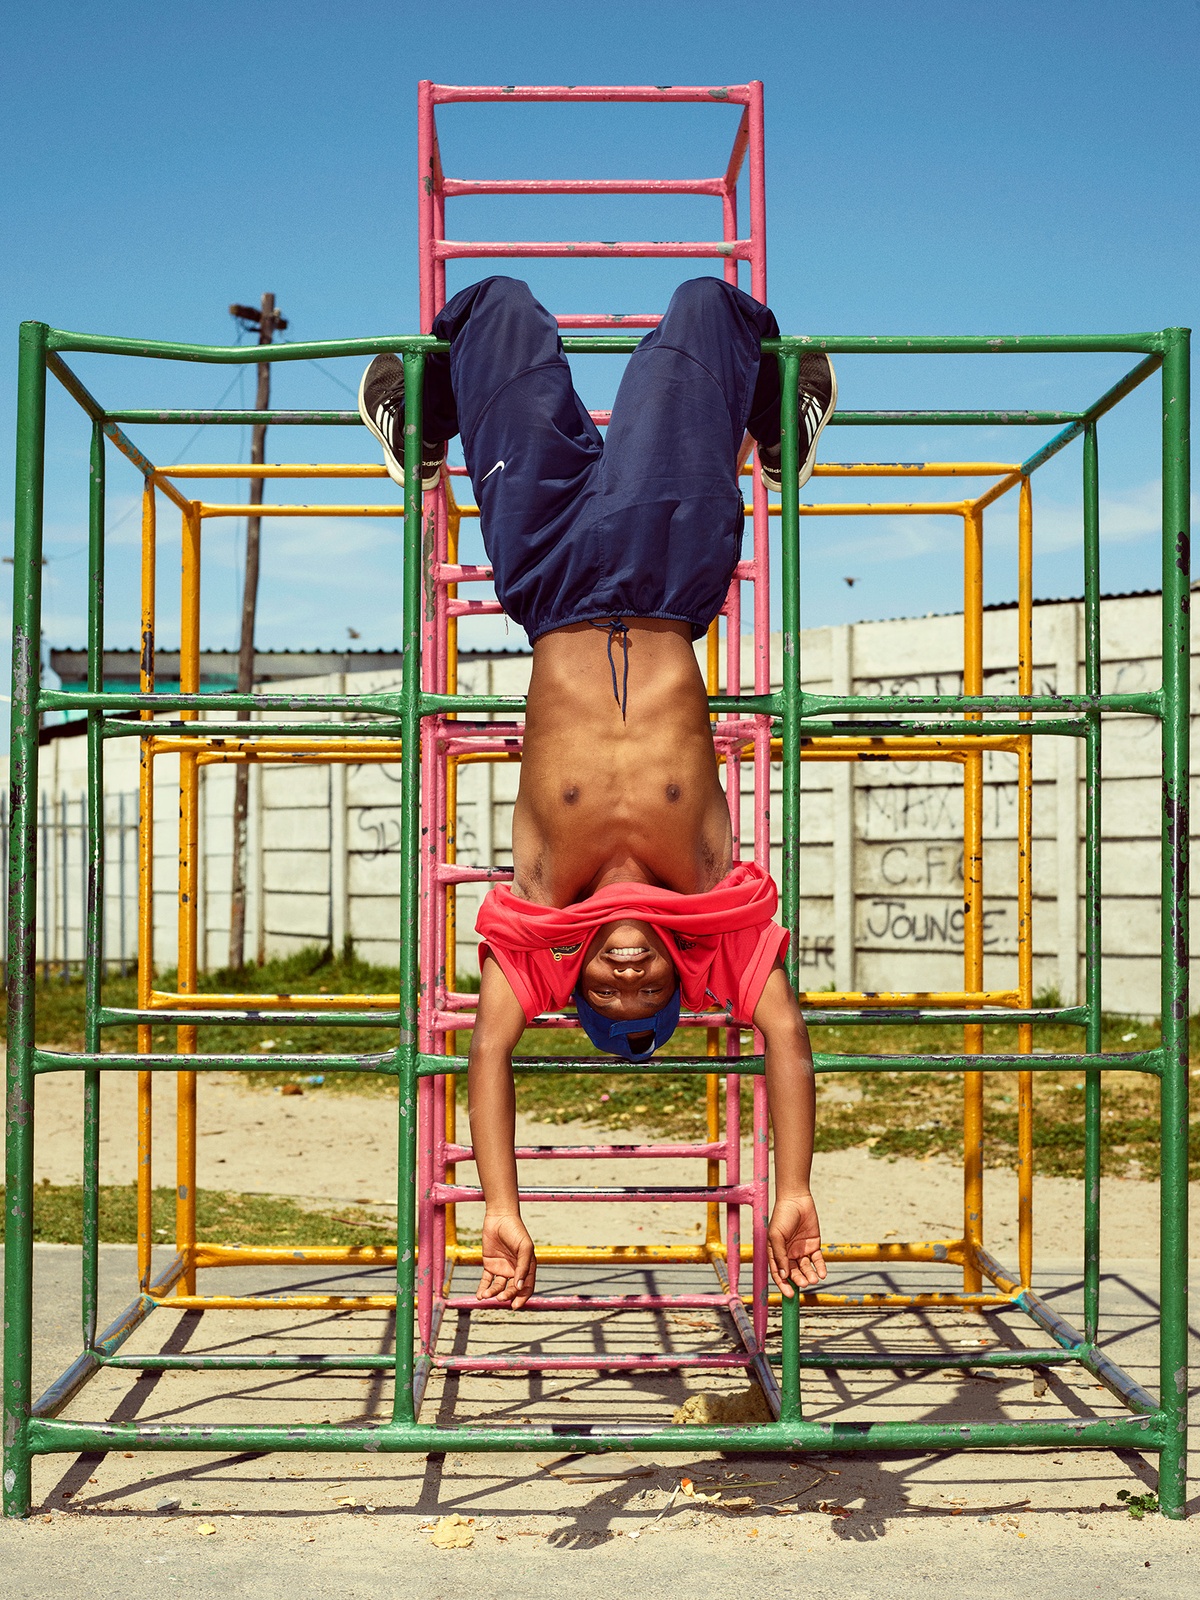 Photograph by Pieter Hugo, from A4’s ‘Atlantis Project’ exchange with the SWAGG United Dance Crew, that depicts a young person hanging upside-down from a metal jungle gym. 
